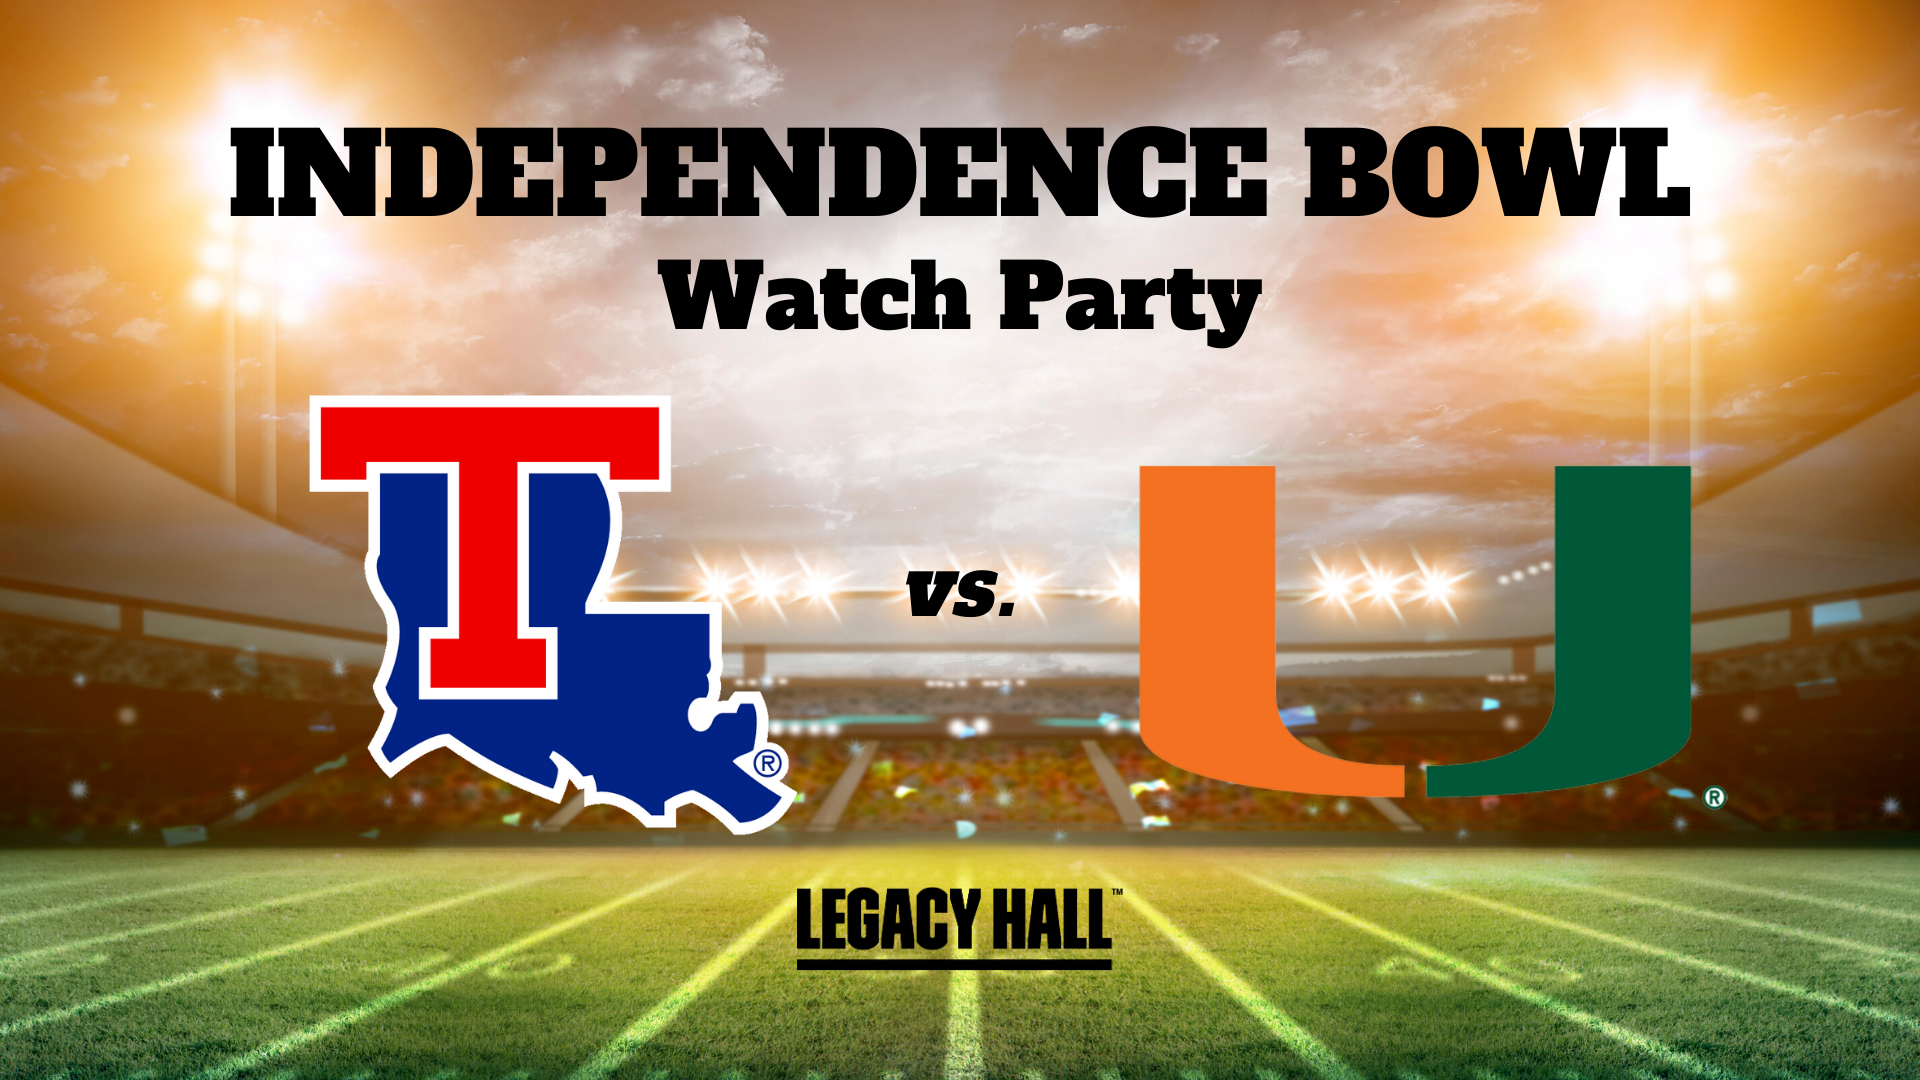 Independence Bowl Watch Party - hero